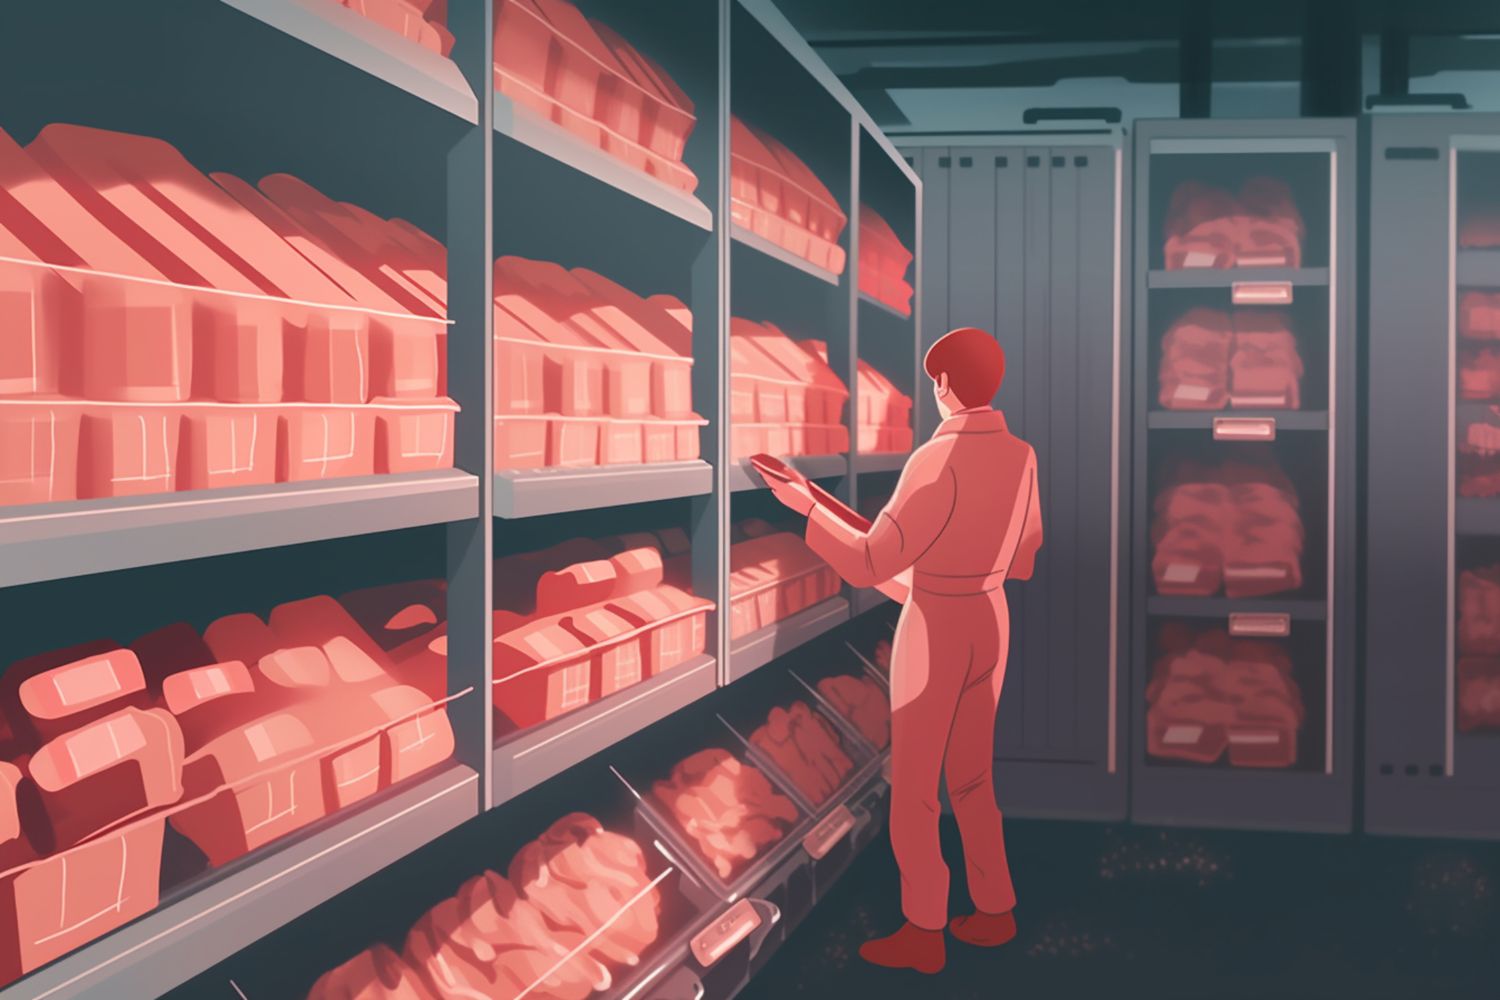  	A red and gray illustration of a person facing an assortment of items in a warehouse